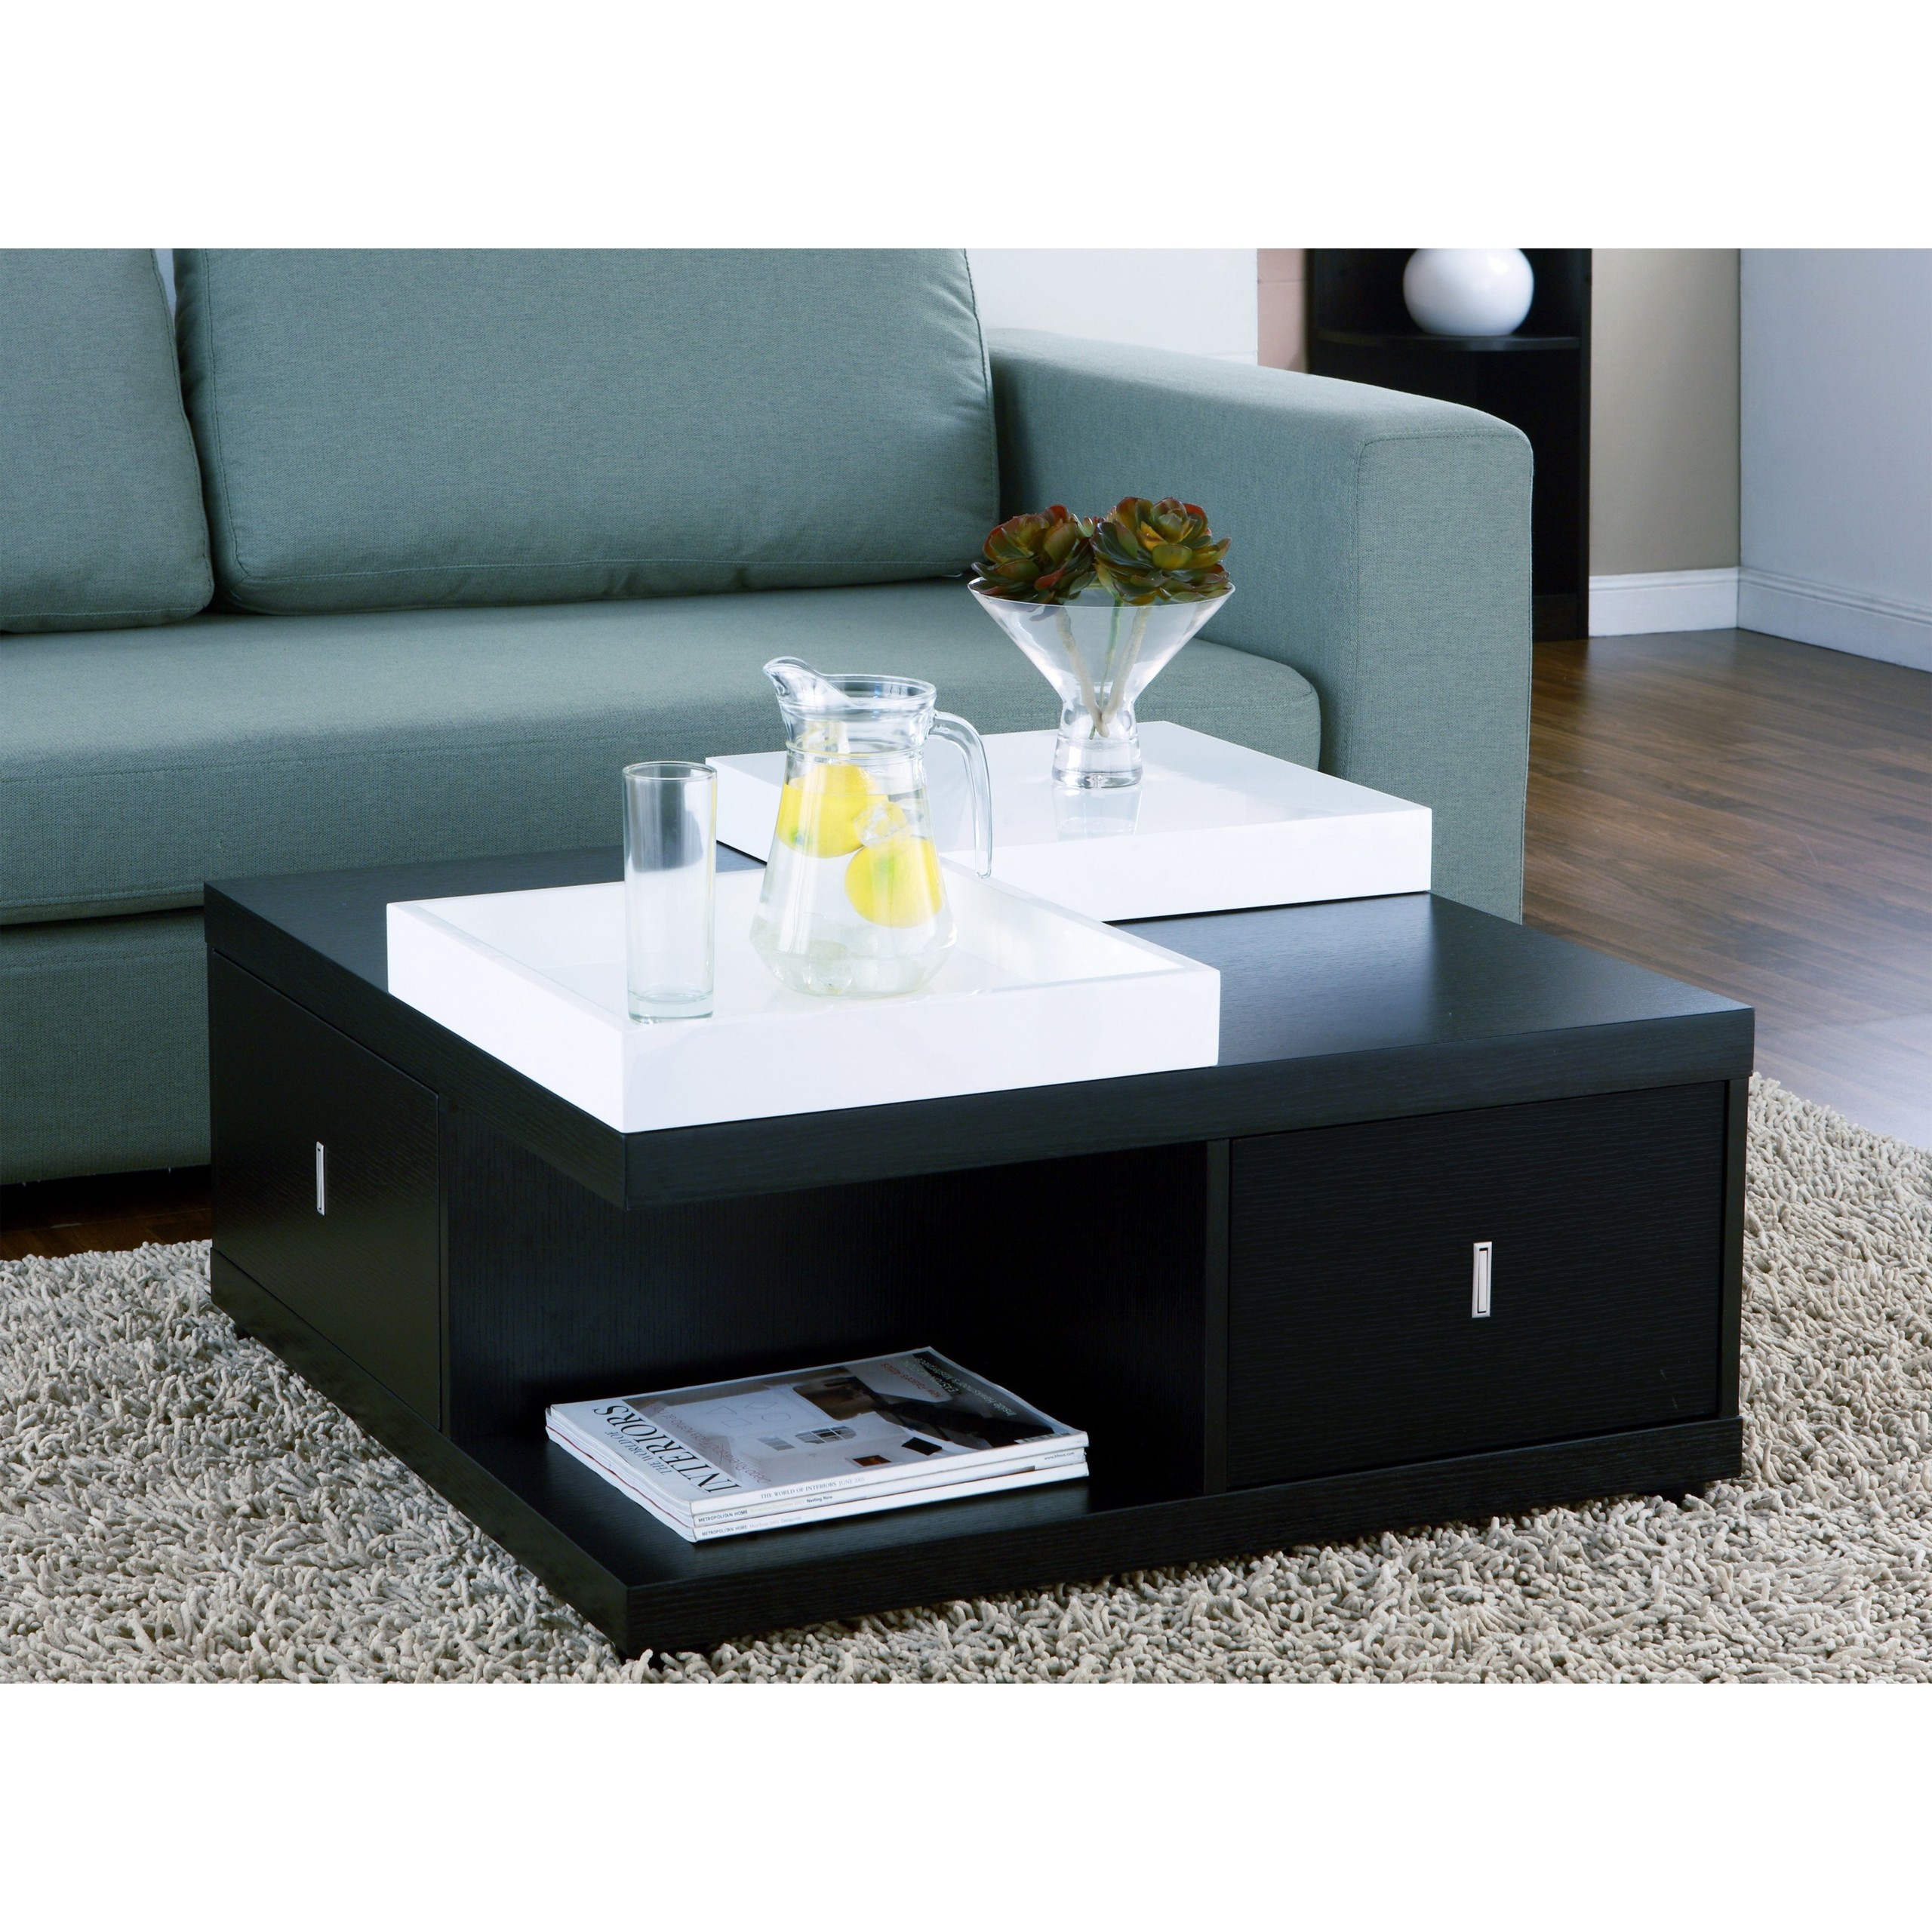 Mareines Black Coffee Table With Serving Trays